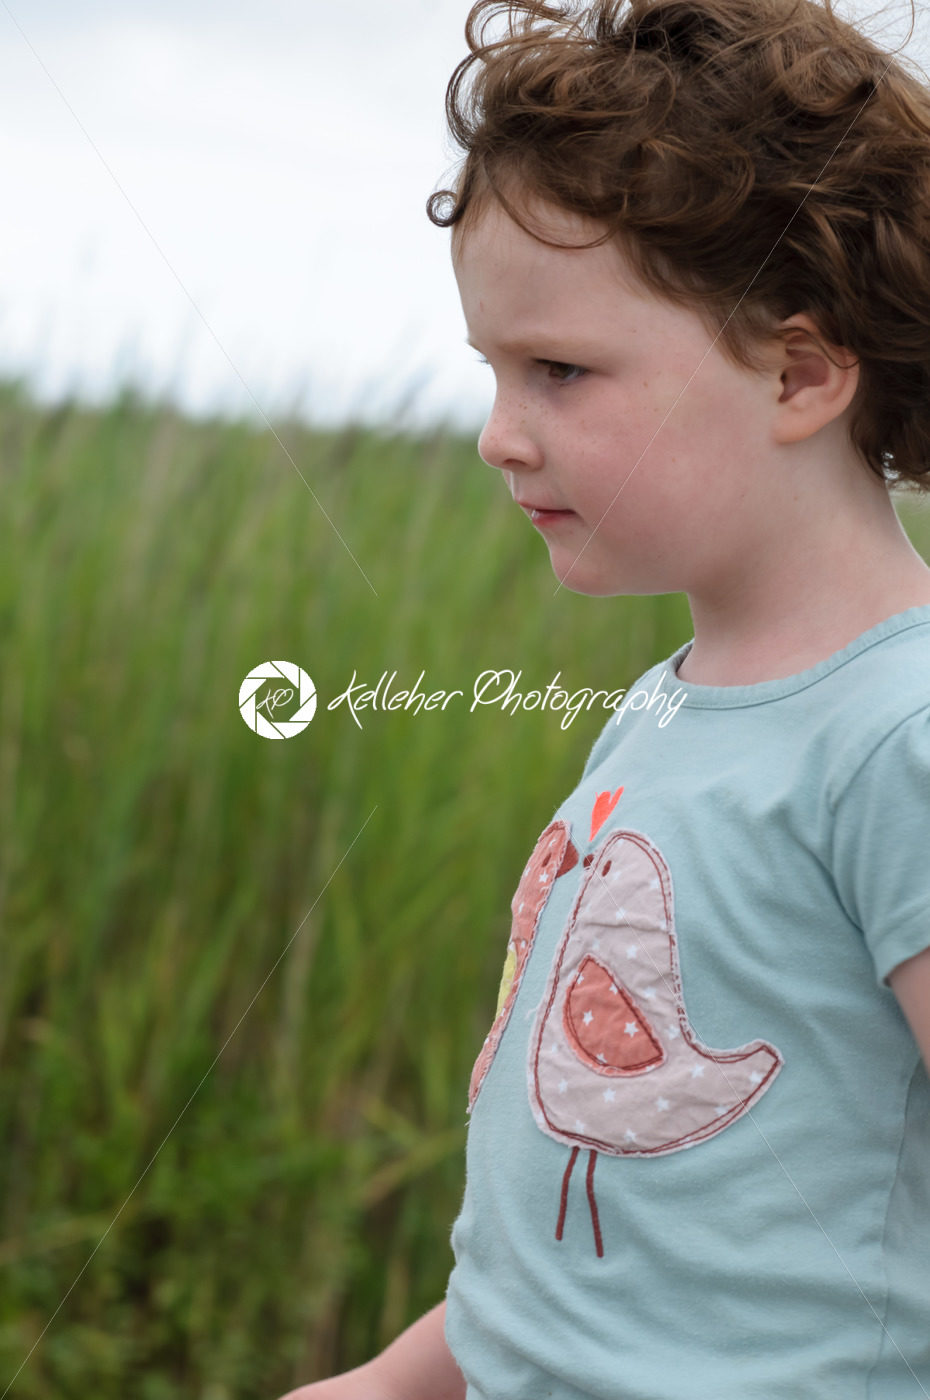 Profile of young girl walking outside along beach sand dunes with reeds - Kelleher Photography Store